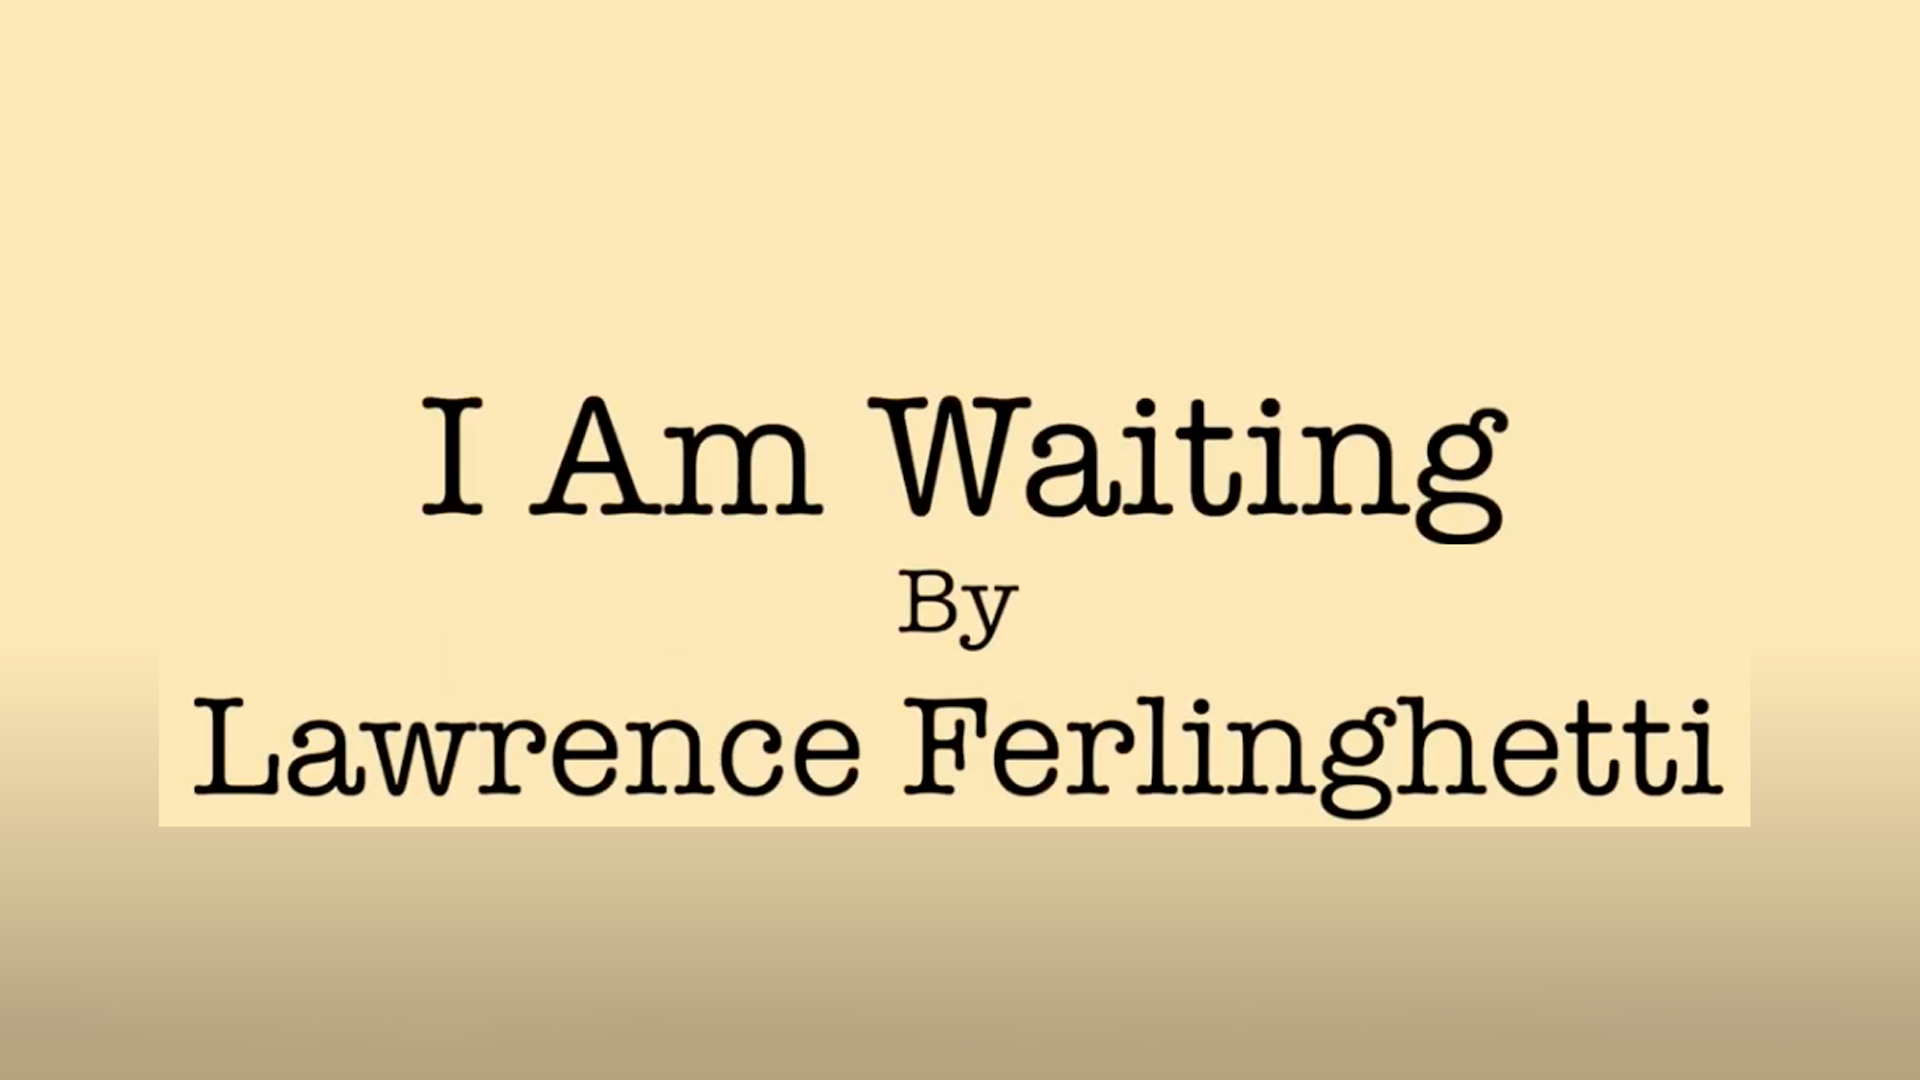 Picture: I am Waiting by Lawrence Ferlinghetti